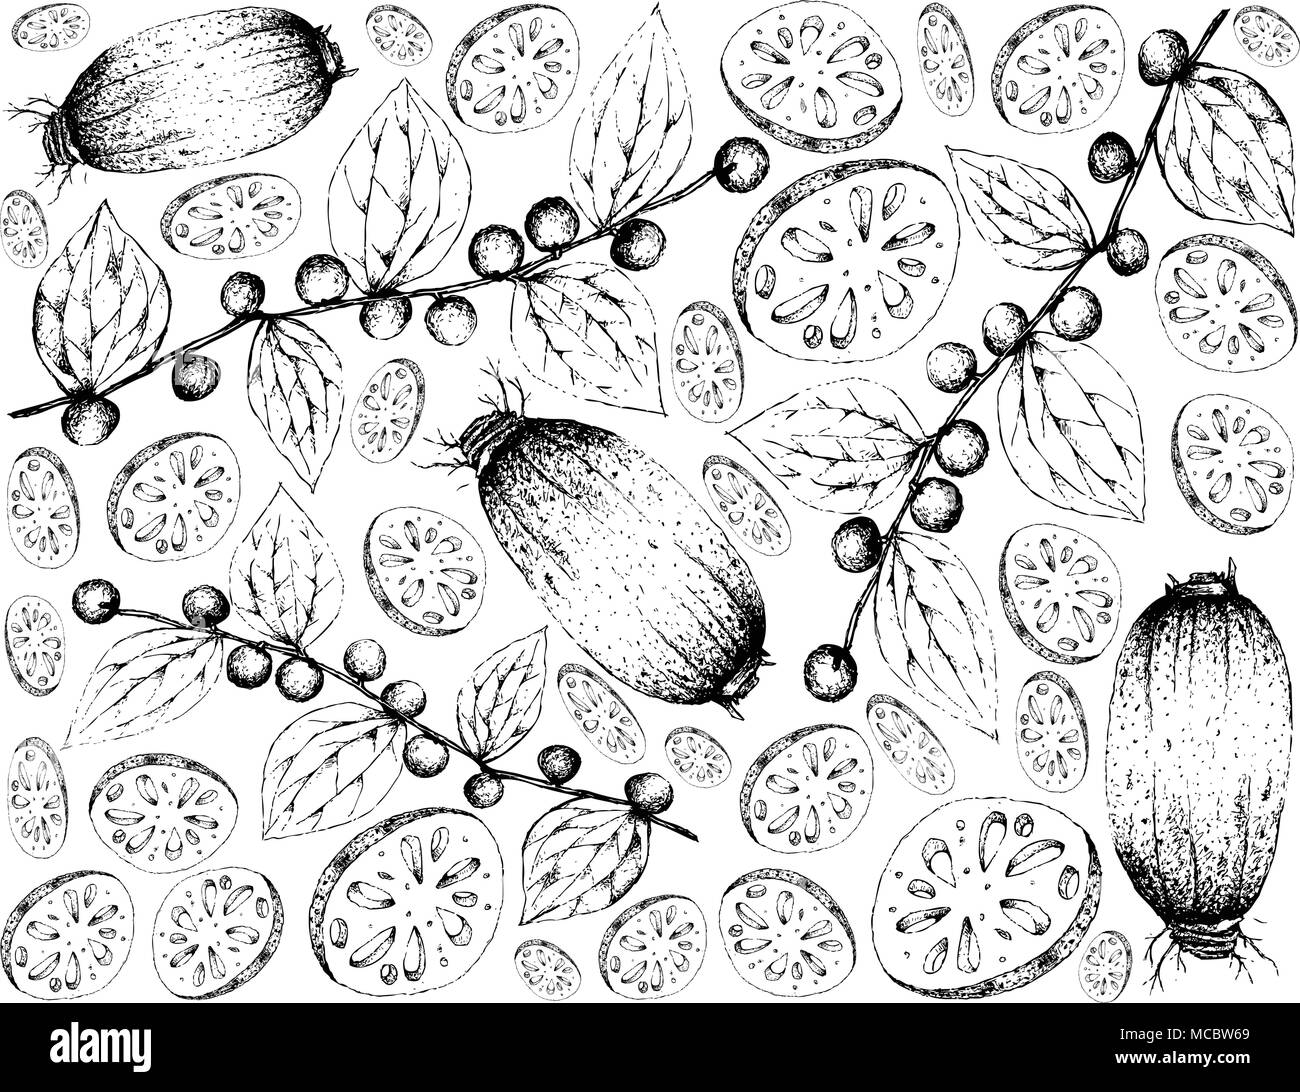 Vegetable and Fruit, Illustration Wallpaper Background of Hand Drawn Sketch Lotus or Water Lily Roots and Jackal Jujube or Ziziphus Oenoplia Fruits Stock Vector